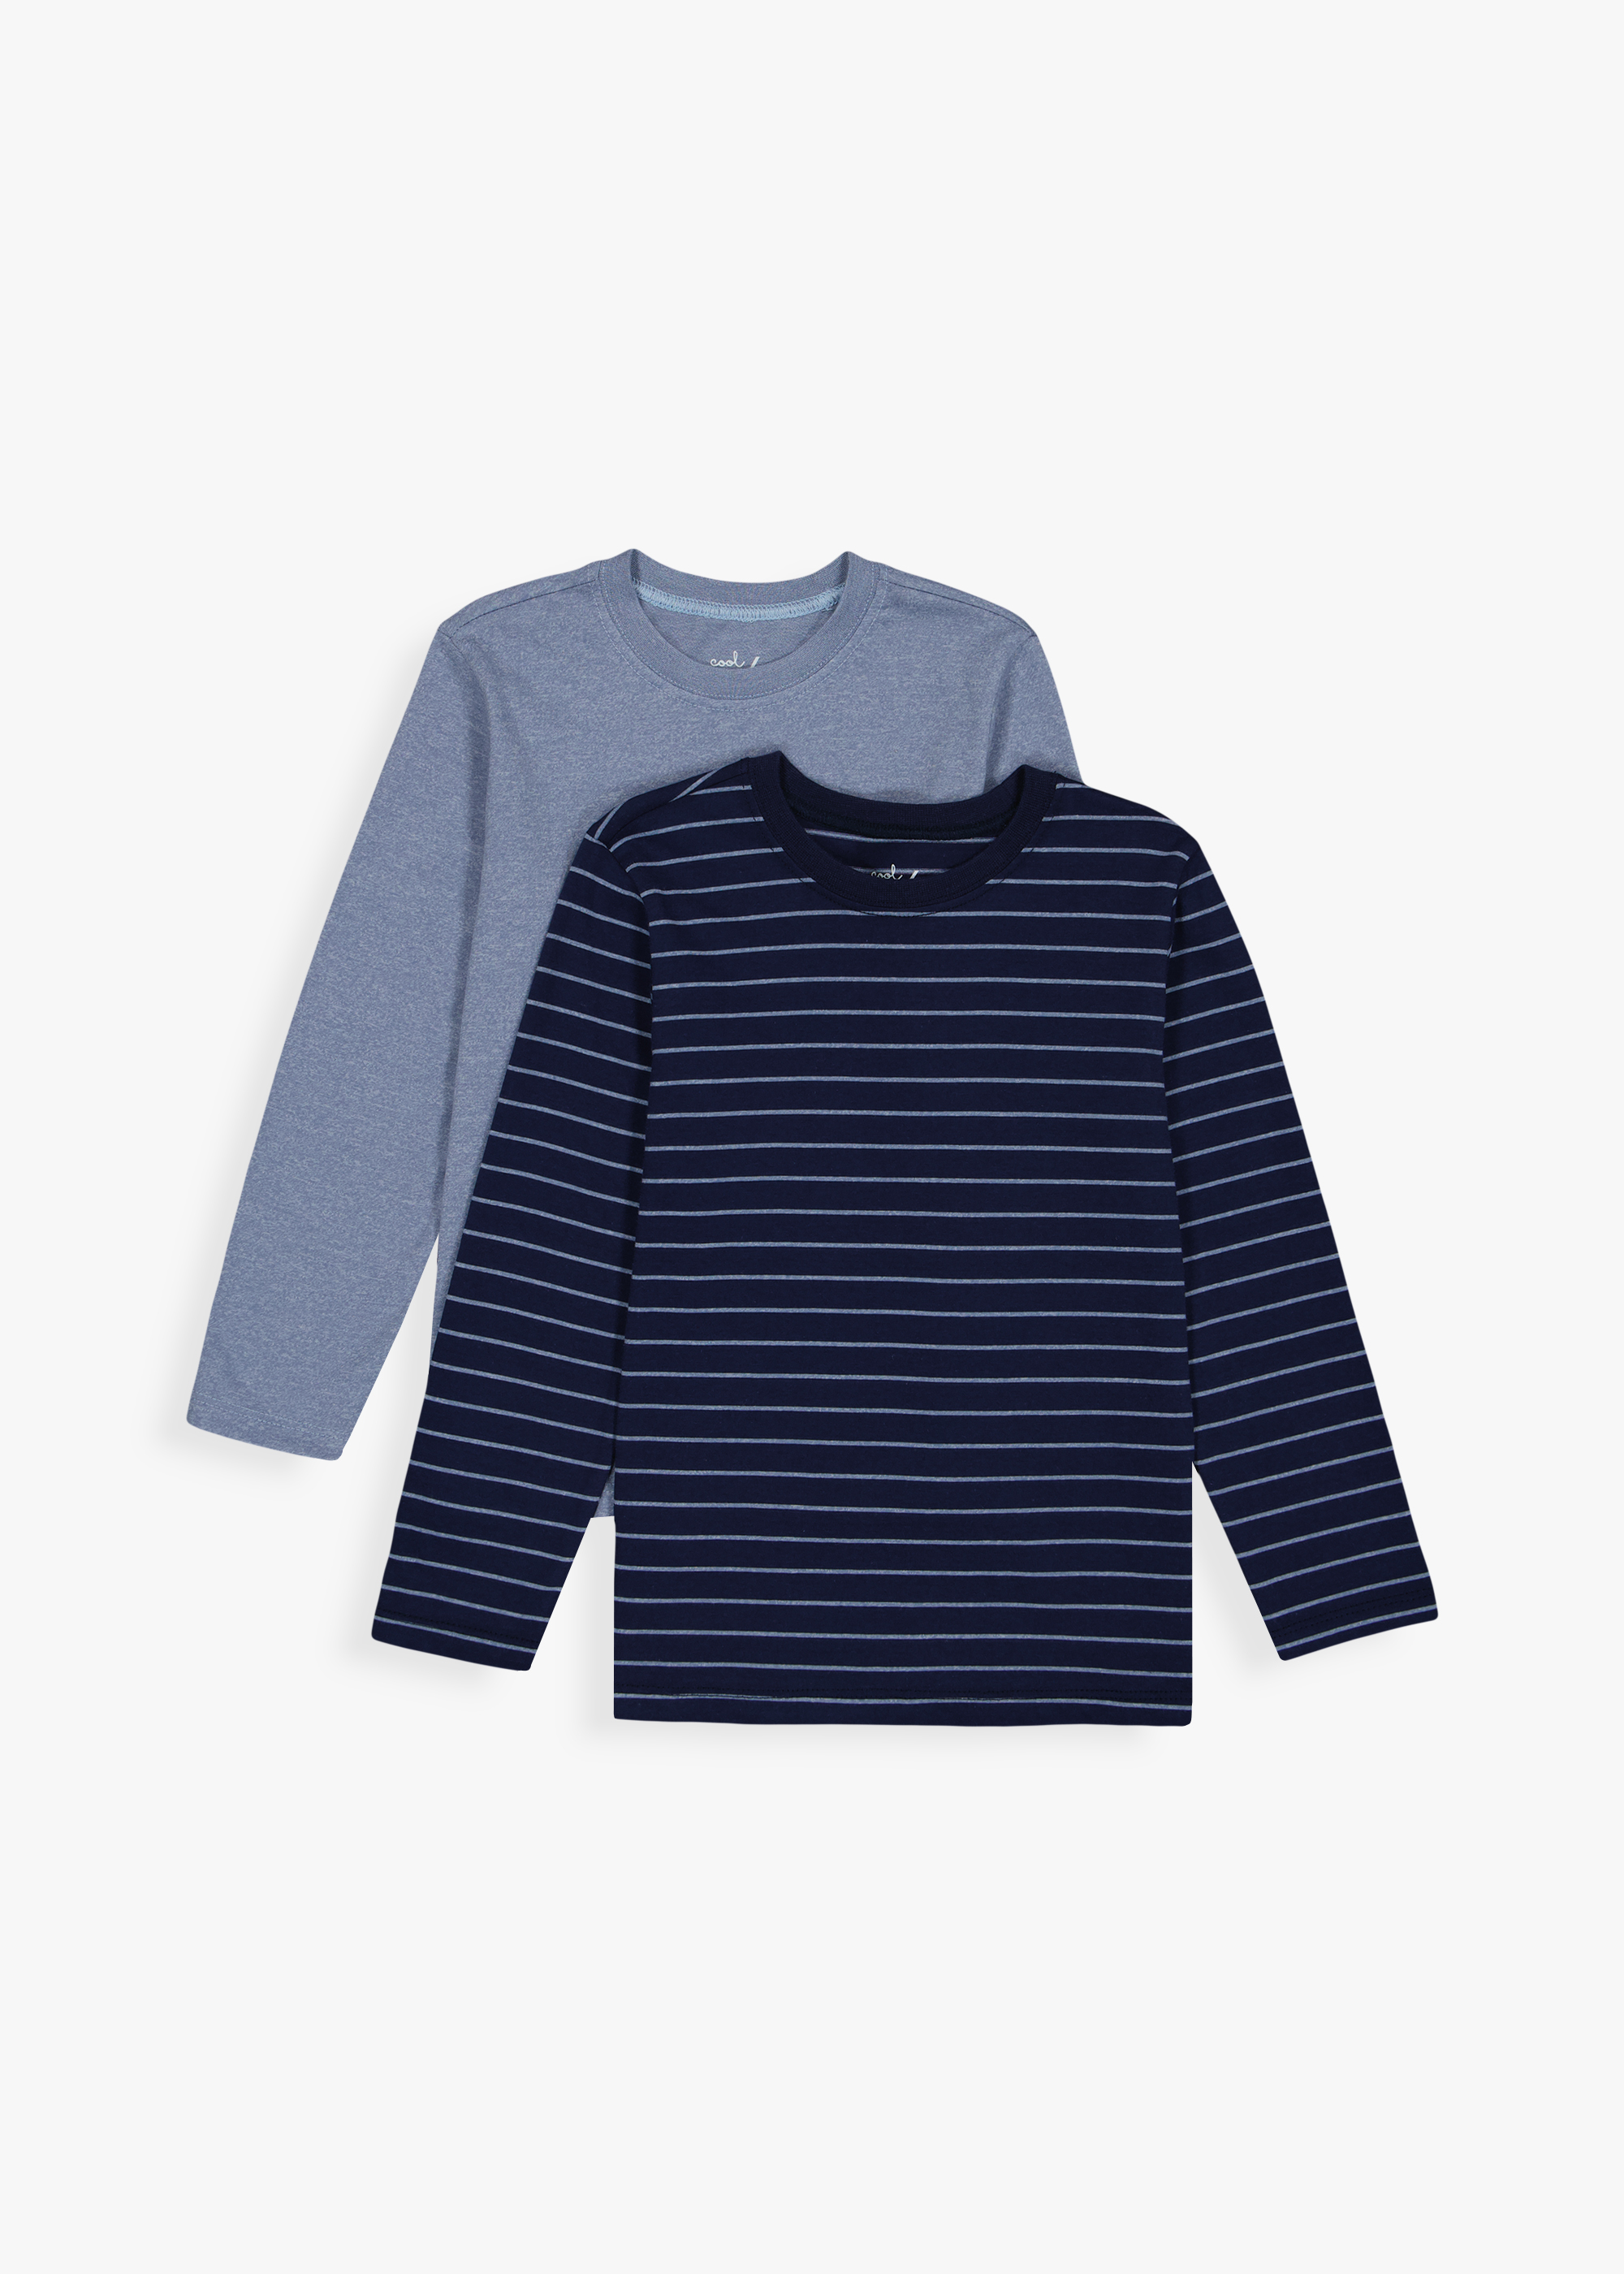 Plain & Stripe Cotton T-shirts 2 Pack | Woolworths.co.za